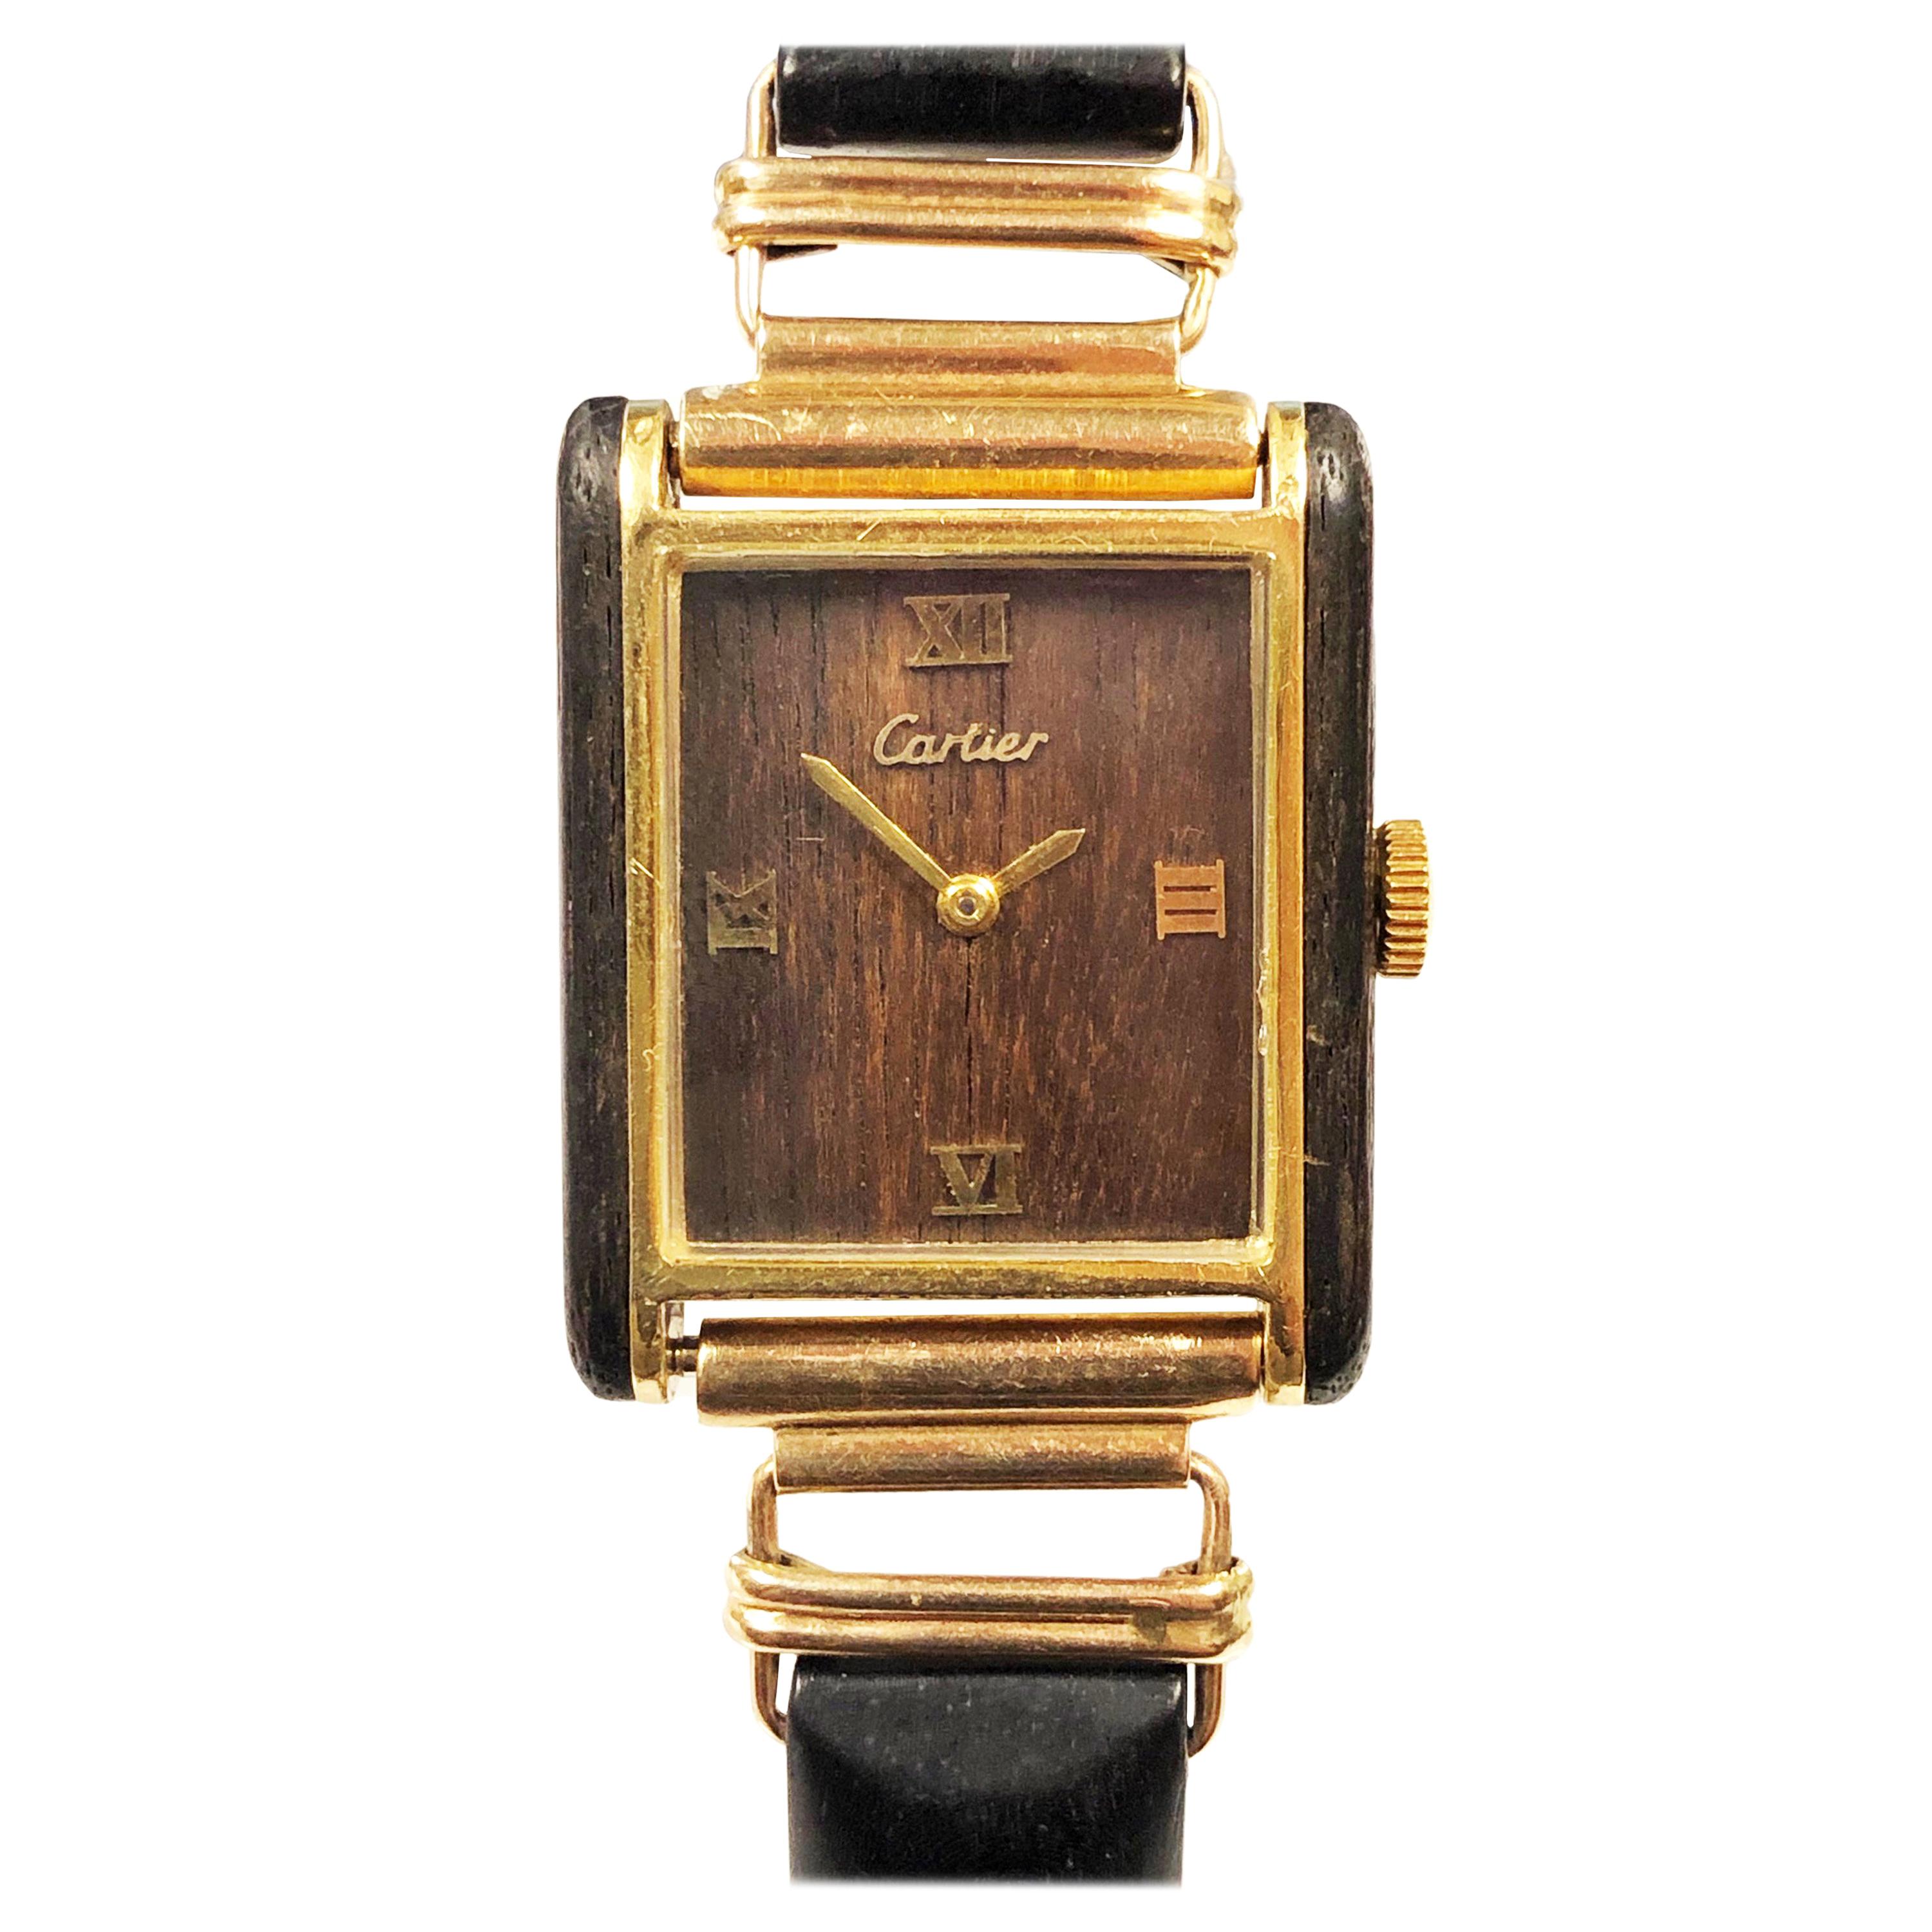 Cartier 1970 Wood Case and Dial Wrist Watch on a Solid Gold and Wood Bracelet